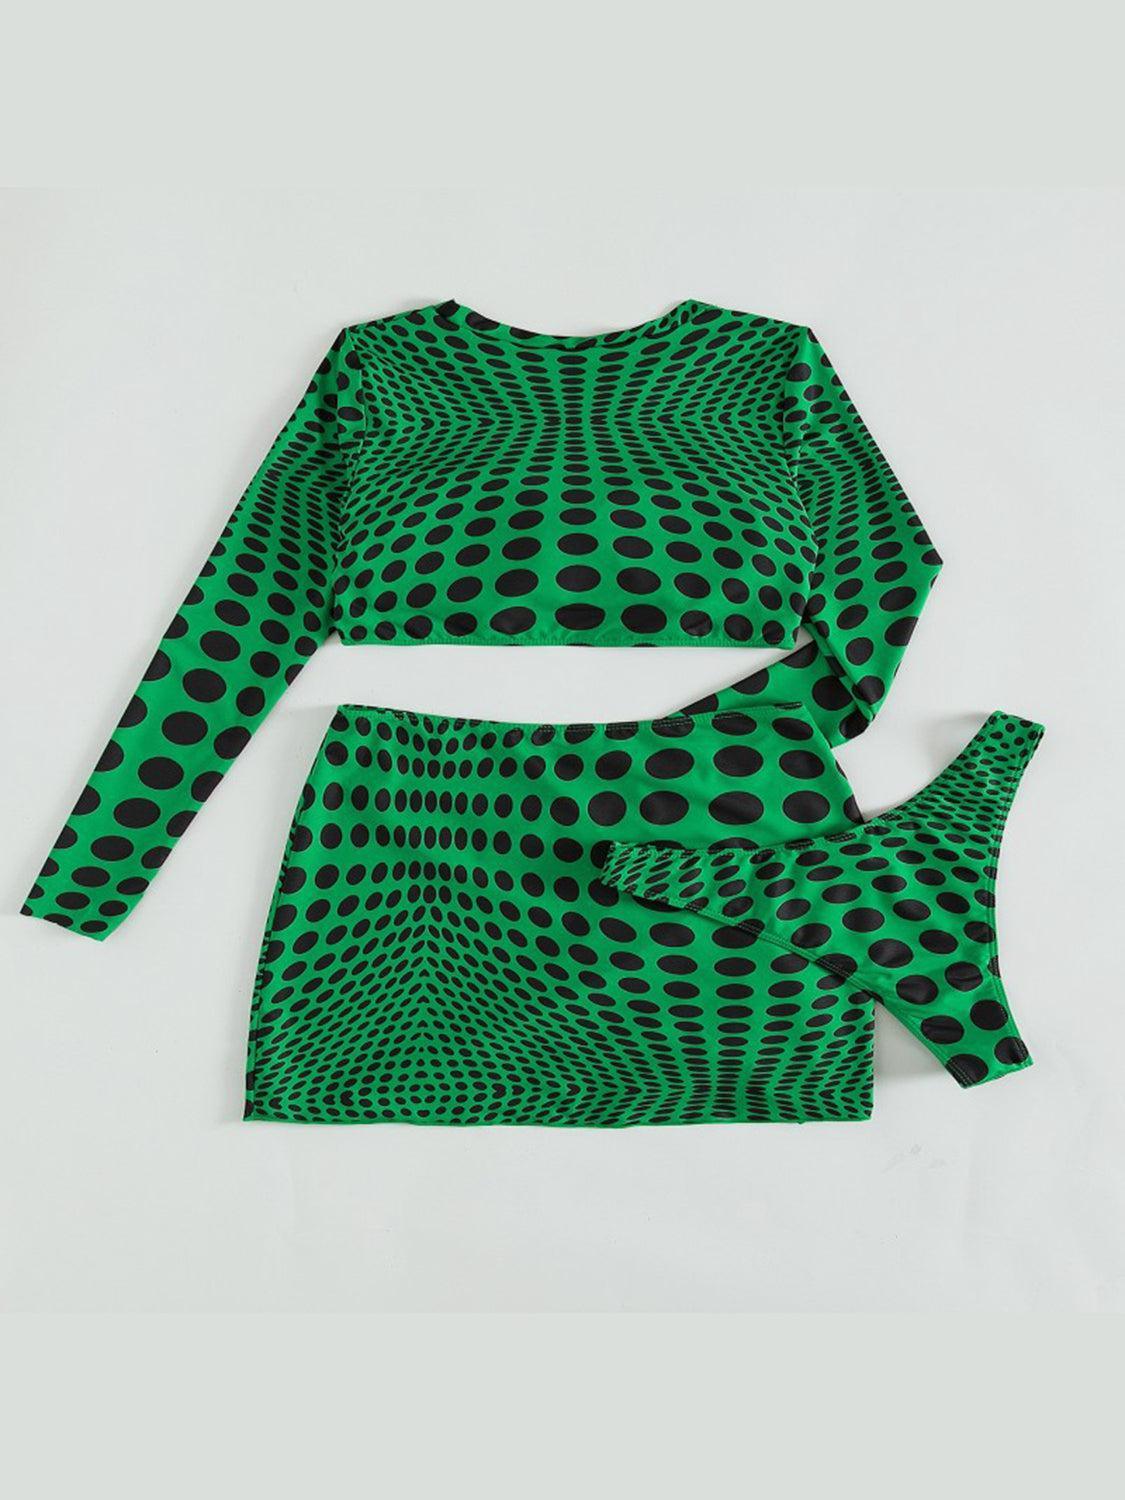 a green and black top with a matching skirt